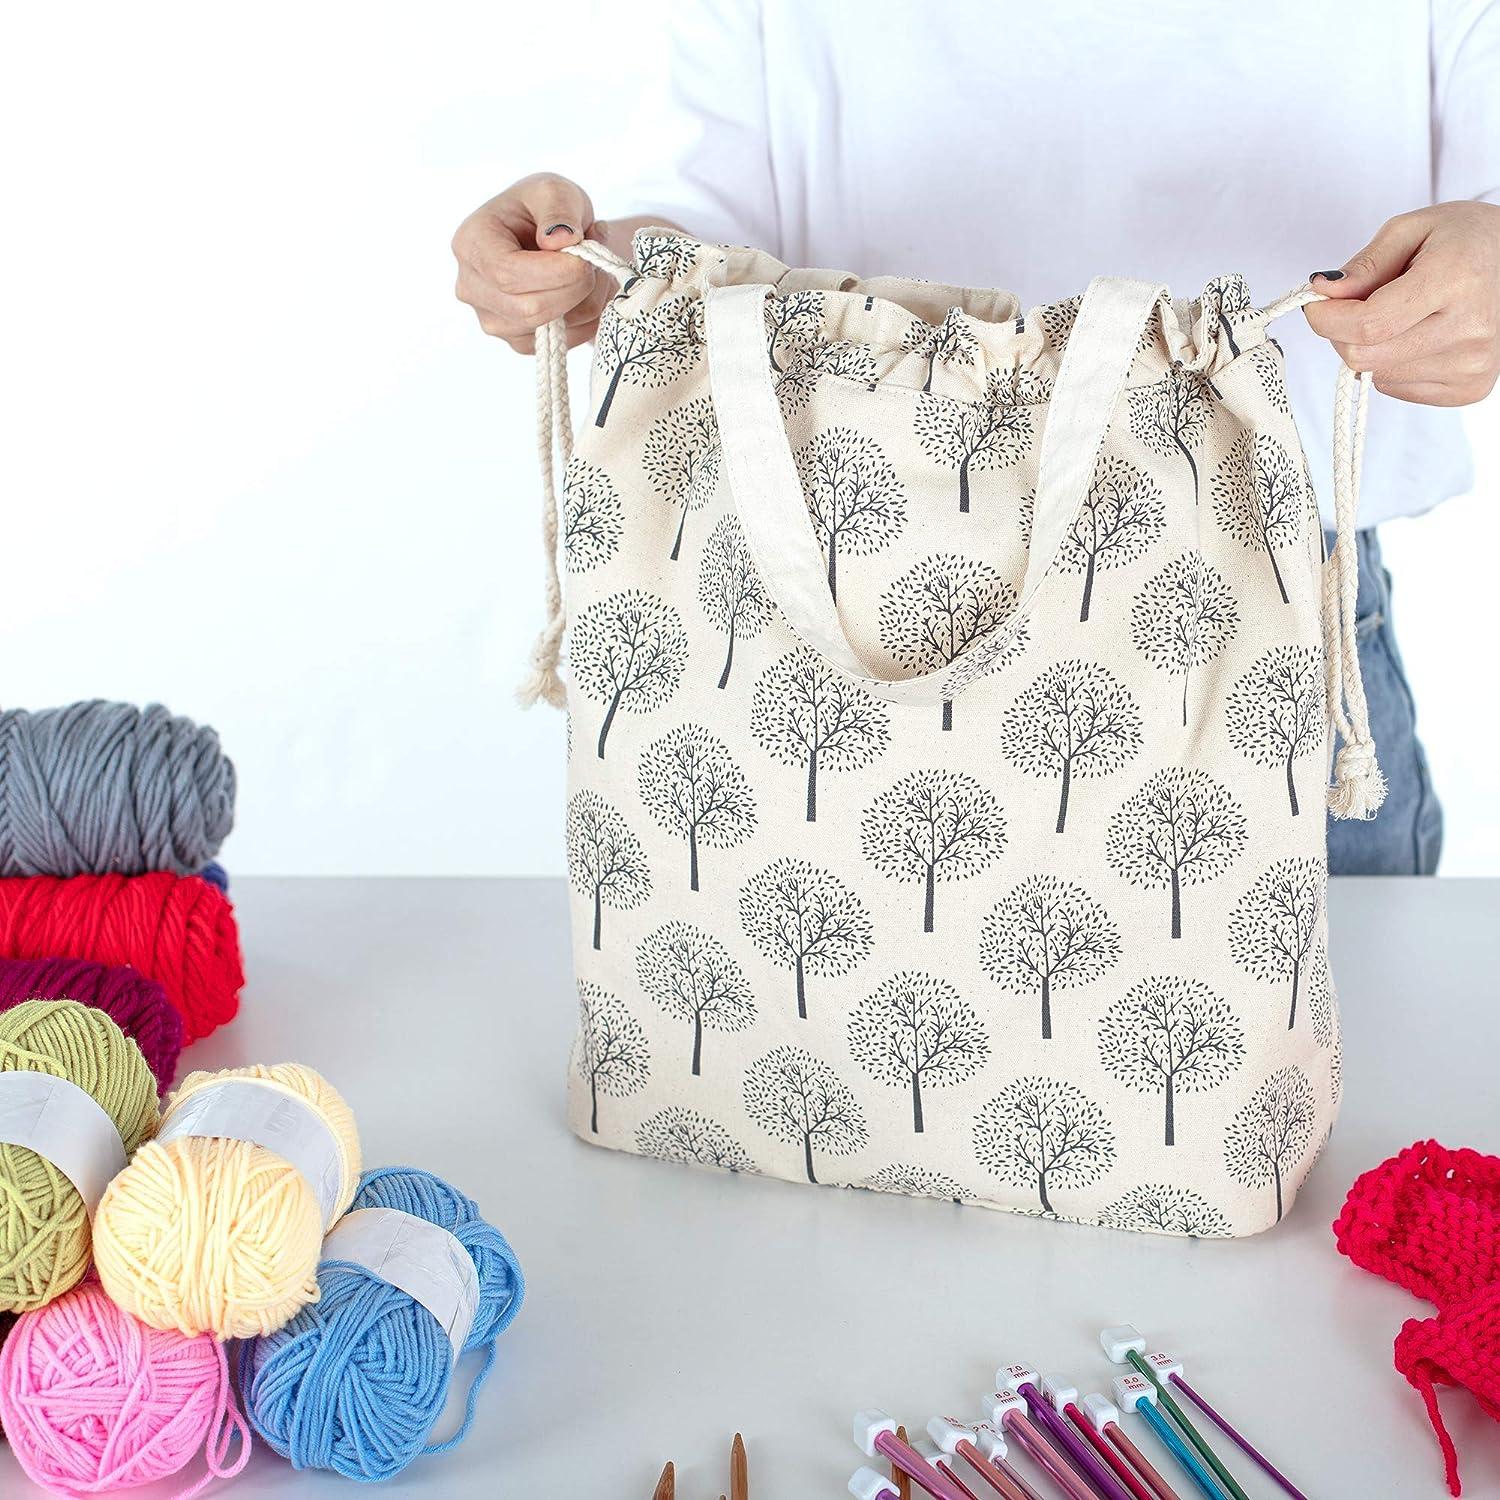 Crochet Knitting Tote Bag Perfect Gift for the Crafter in the